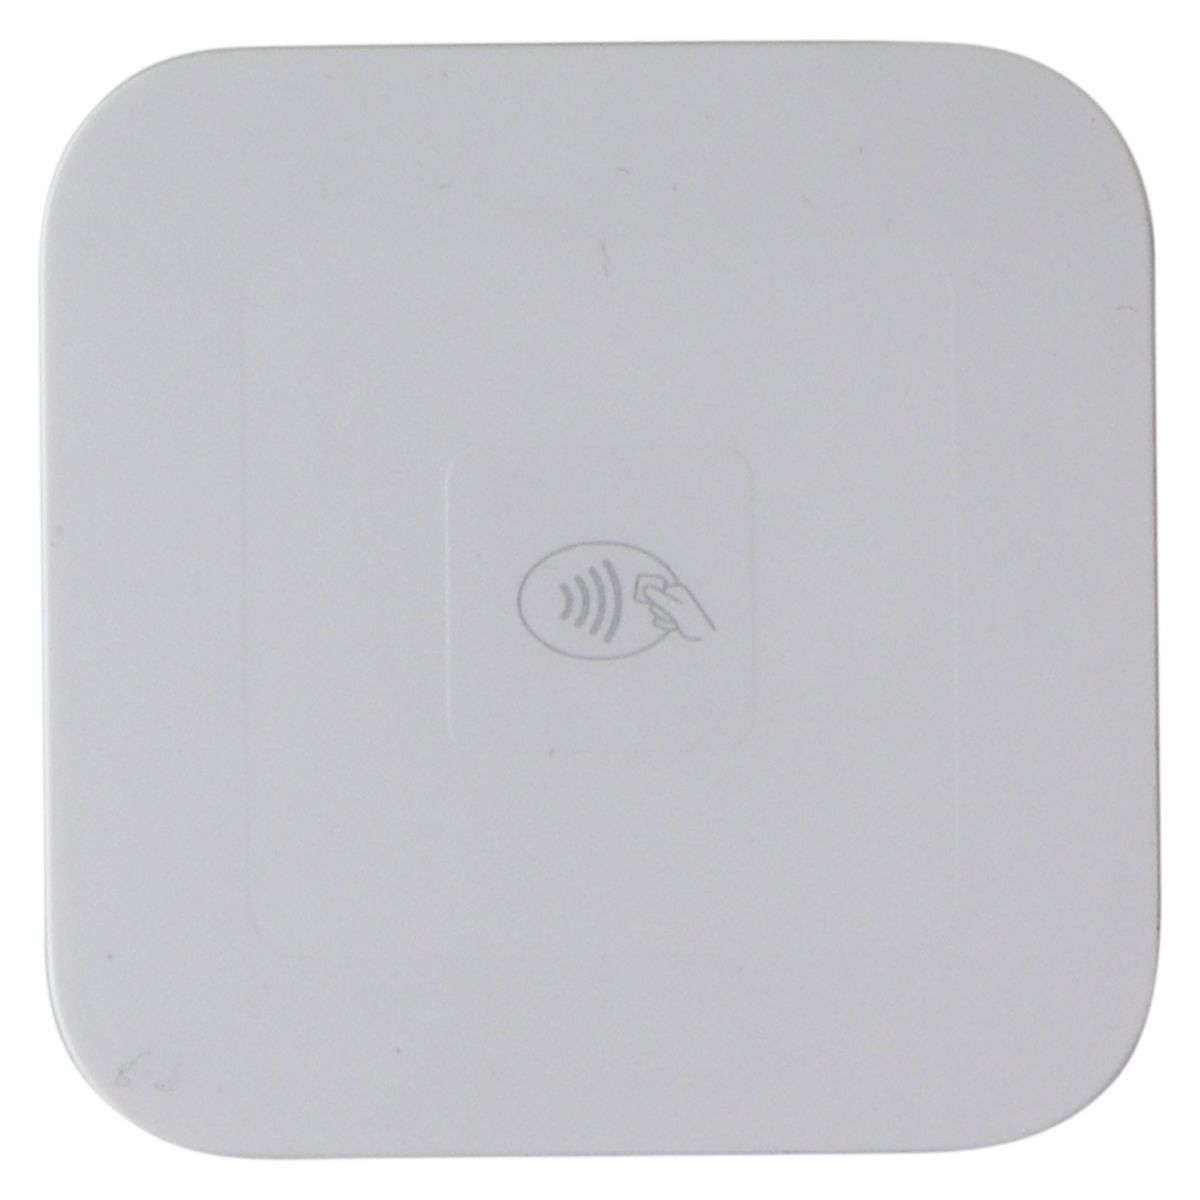 Square S6 Credit Card Reader for Contactless Chip (S6 Model 1st Gen) - White